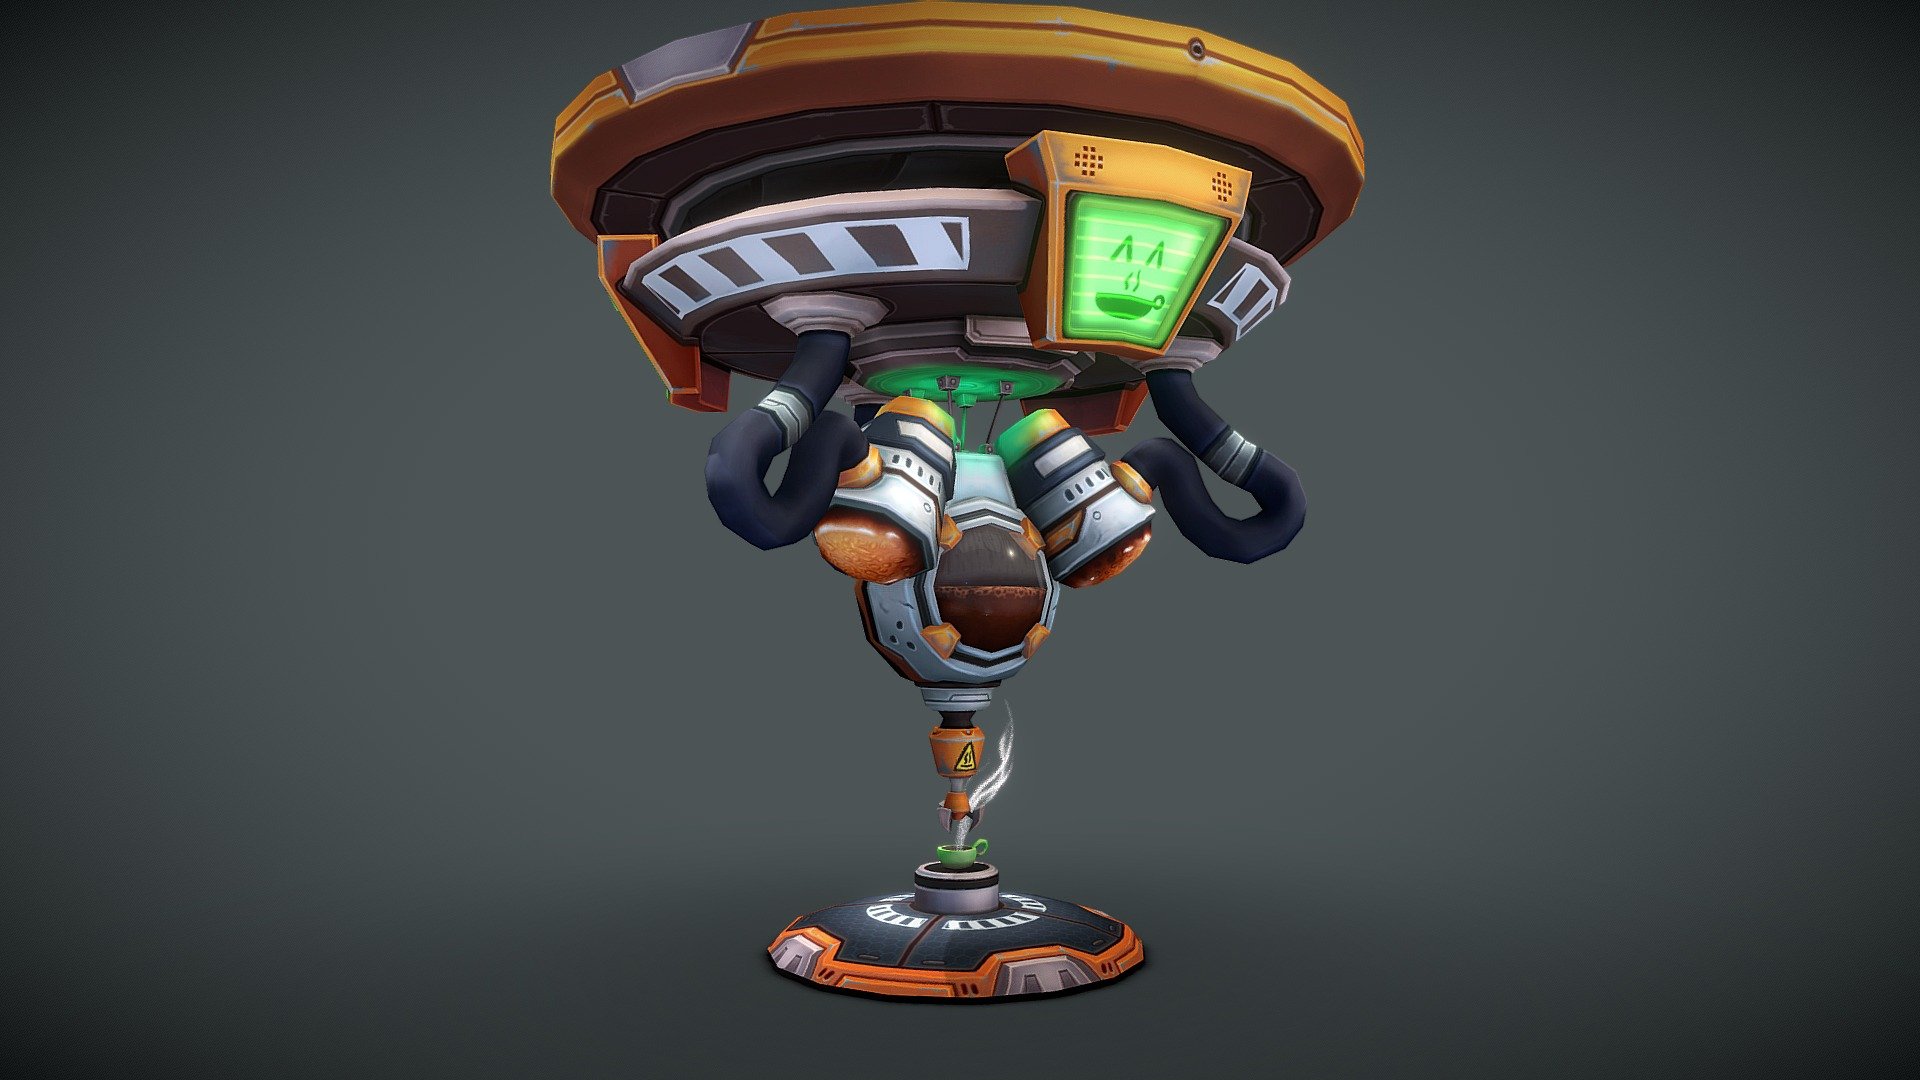 This model was created for the CGMA class &ldquo;Creating Stylized Game Assets